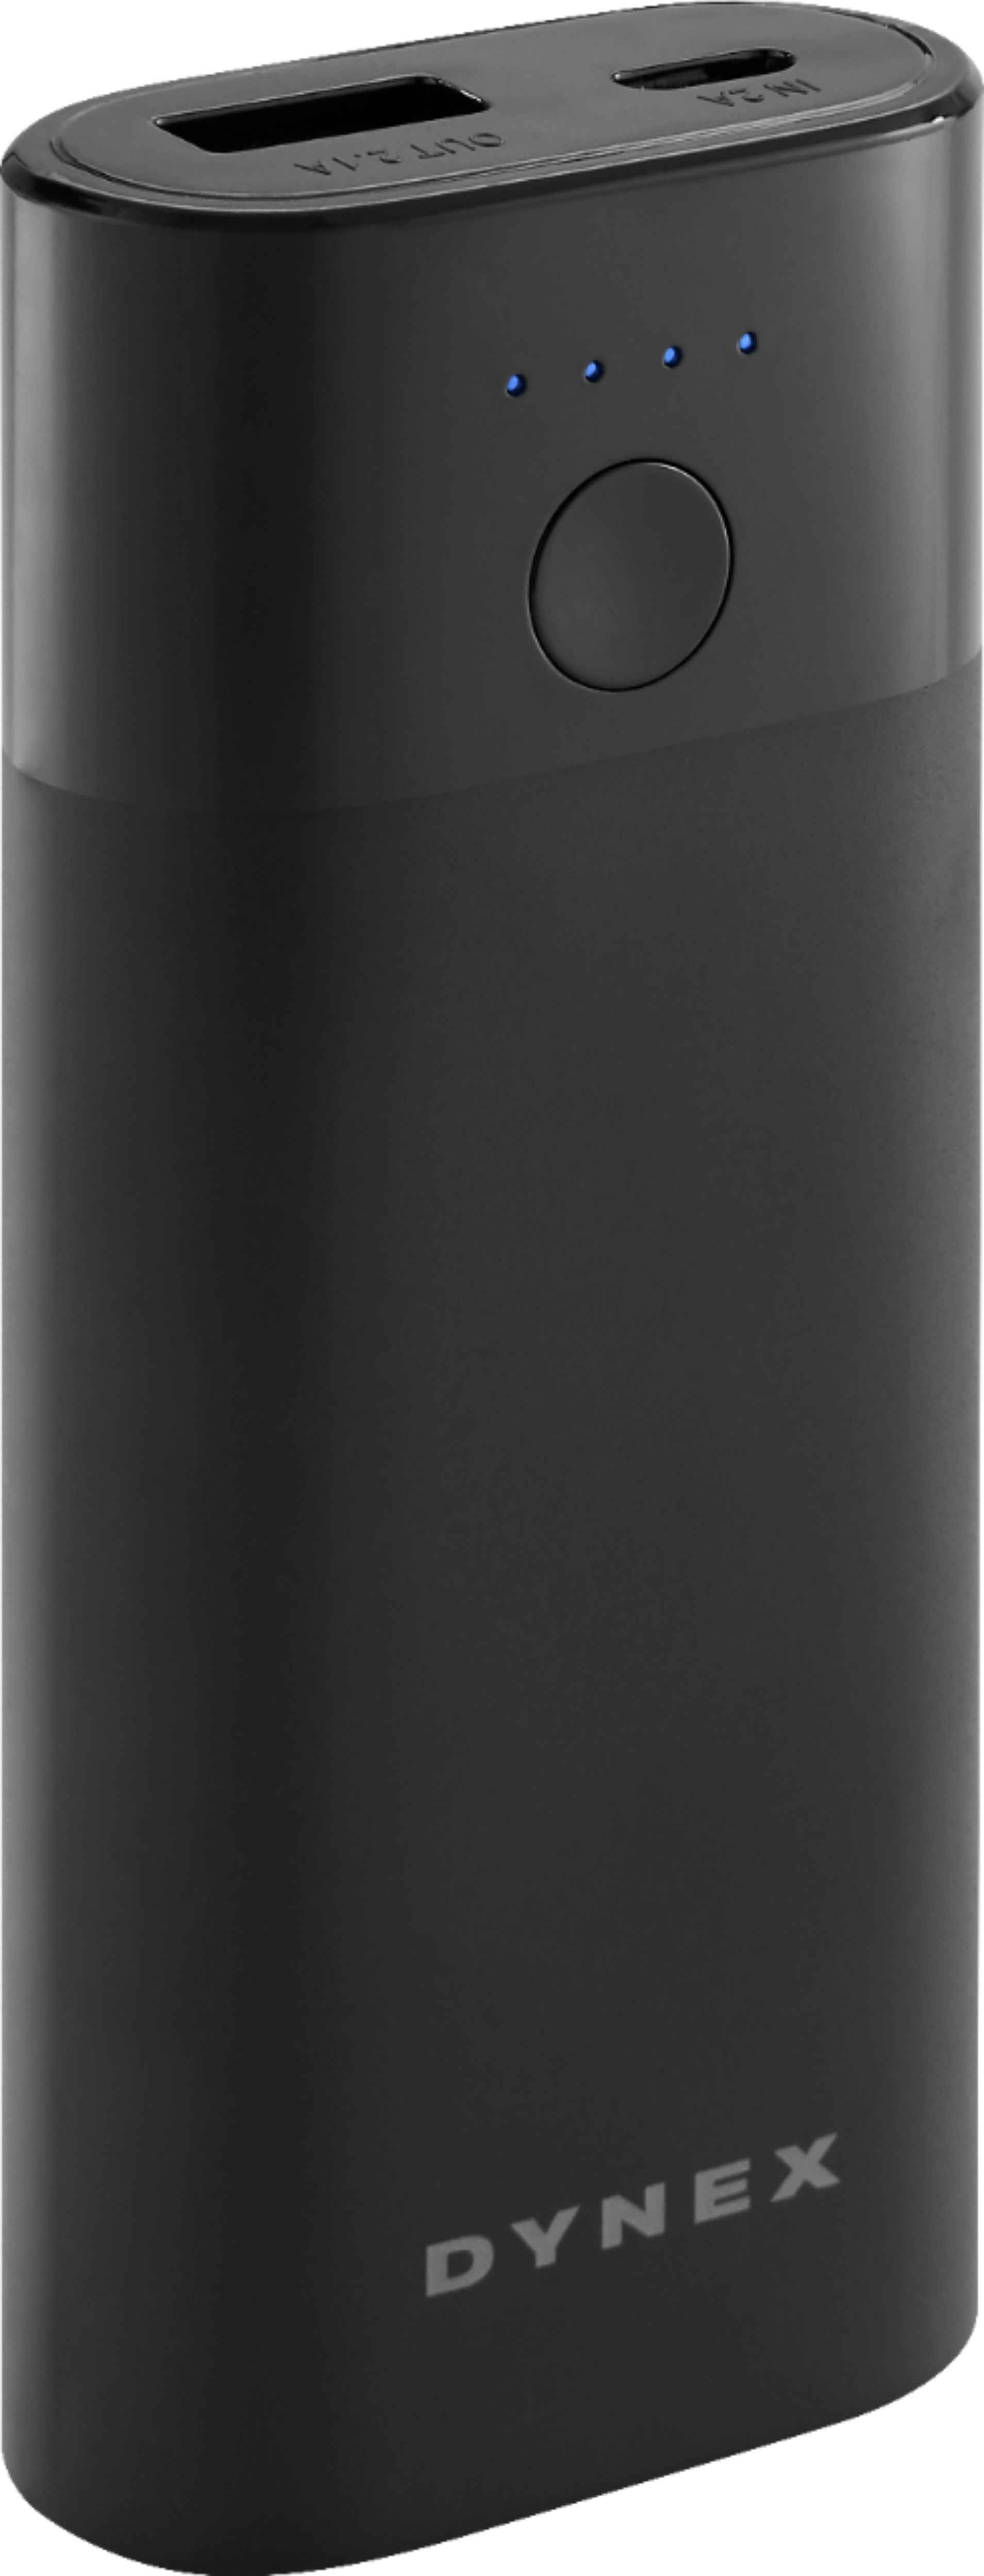 Angle View: Dynex™ - 5000 mAh Portable Charger for Most USB-Enabled Devices - Black